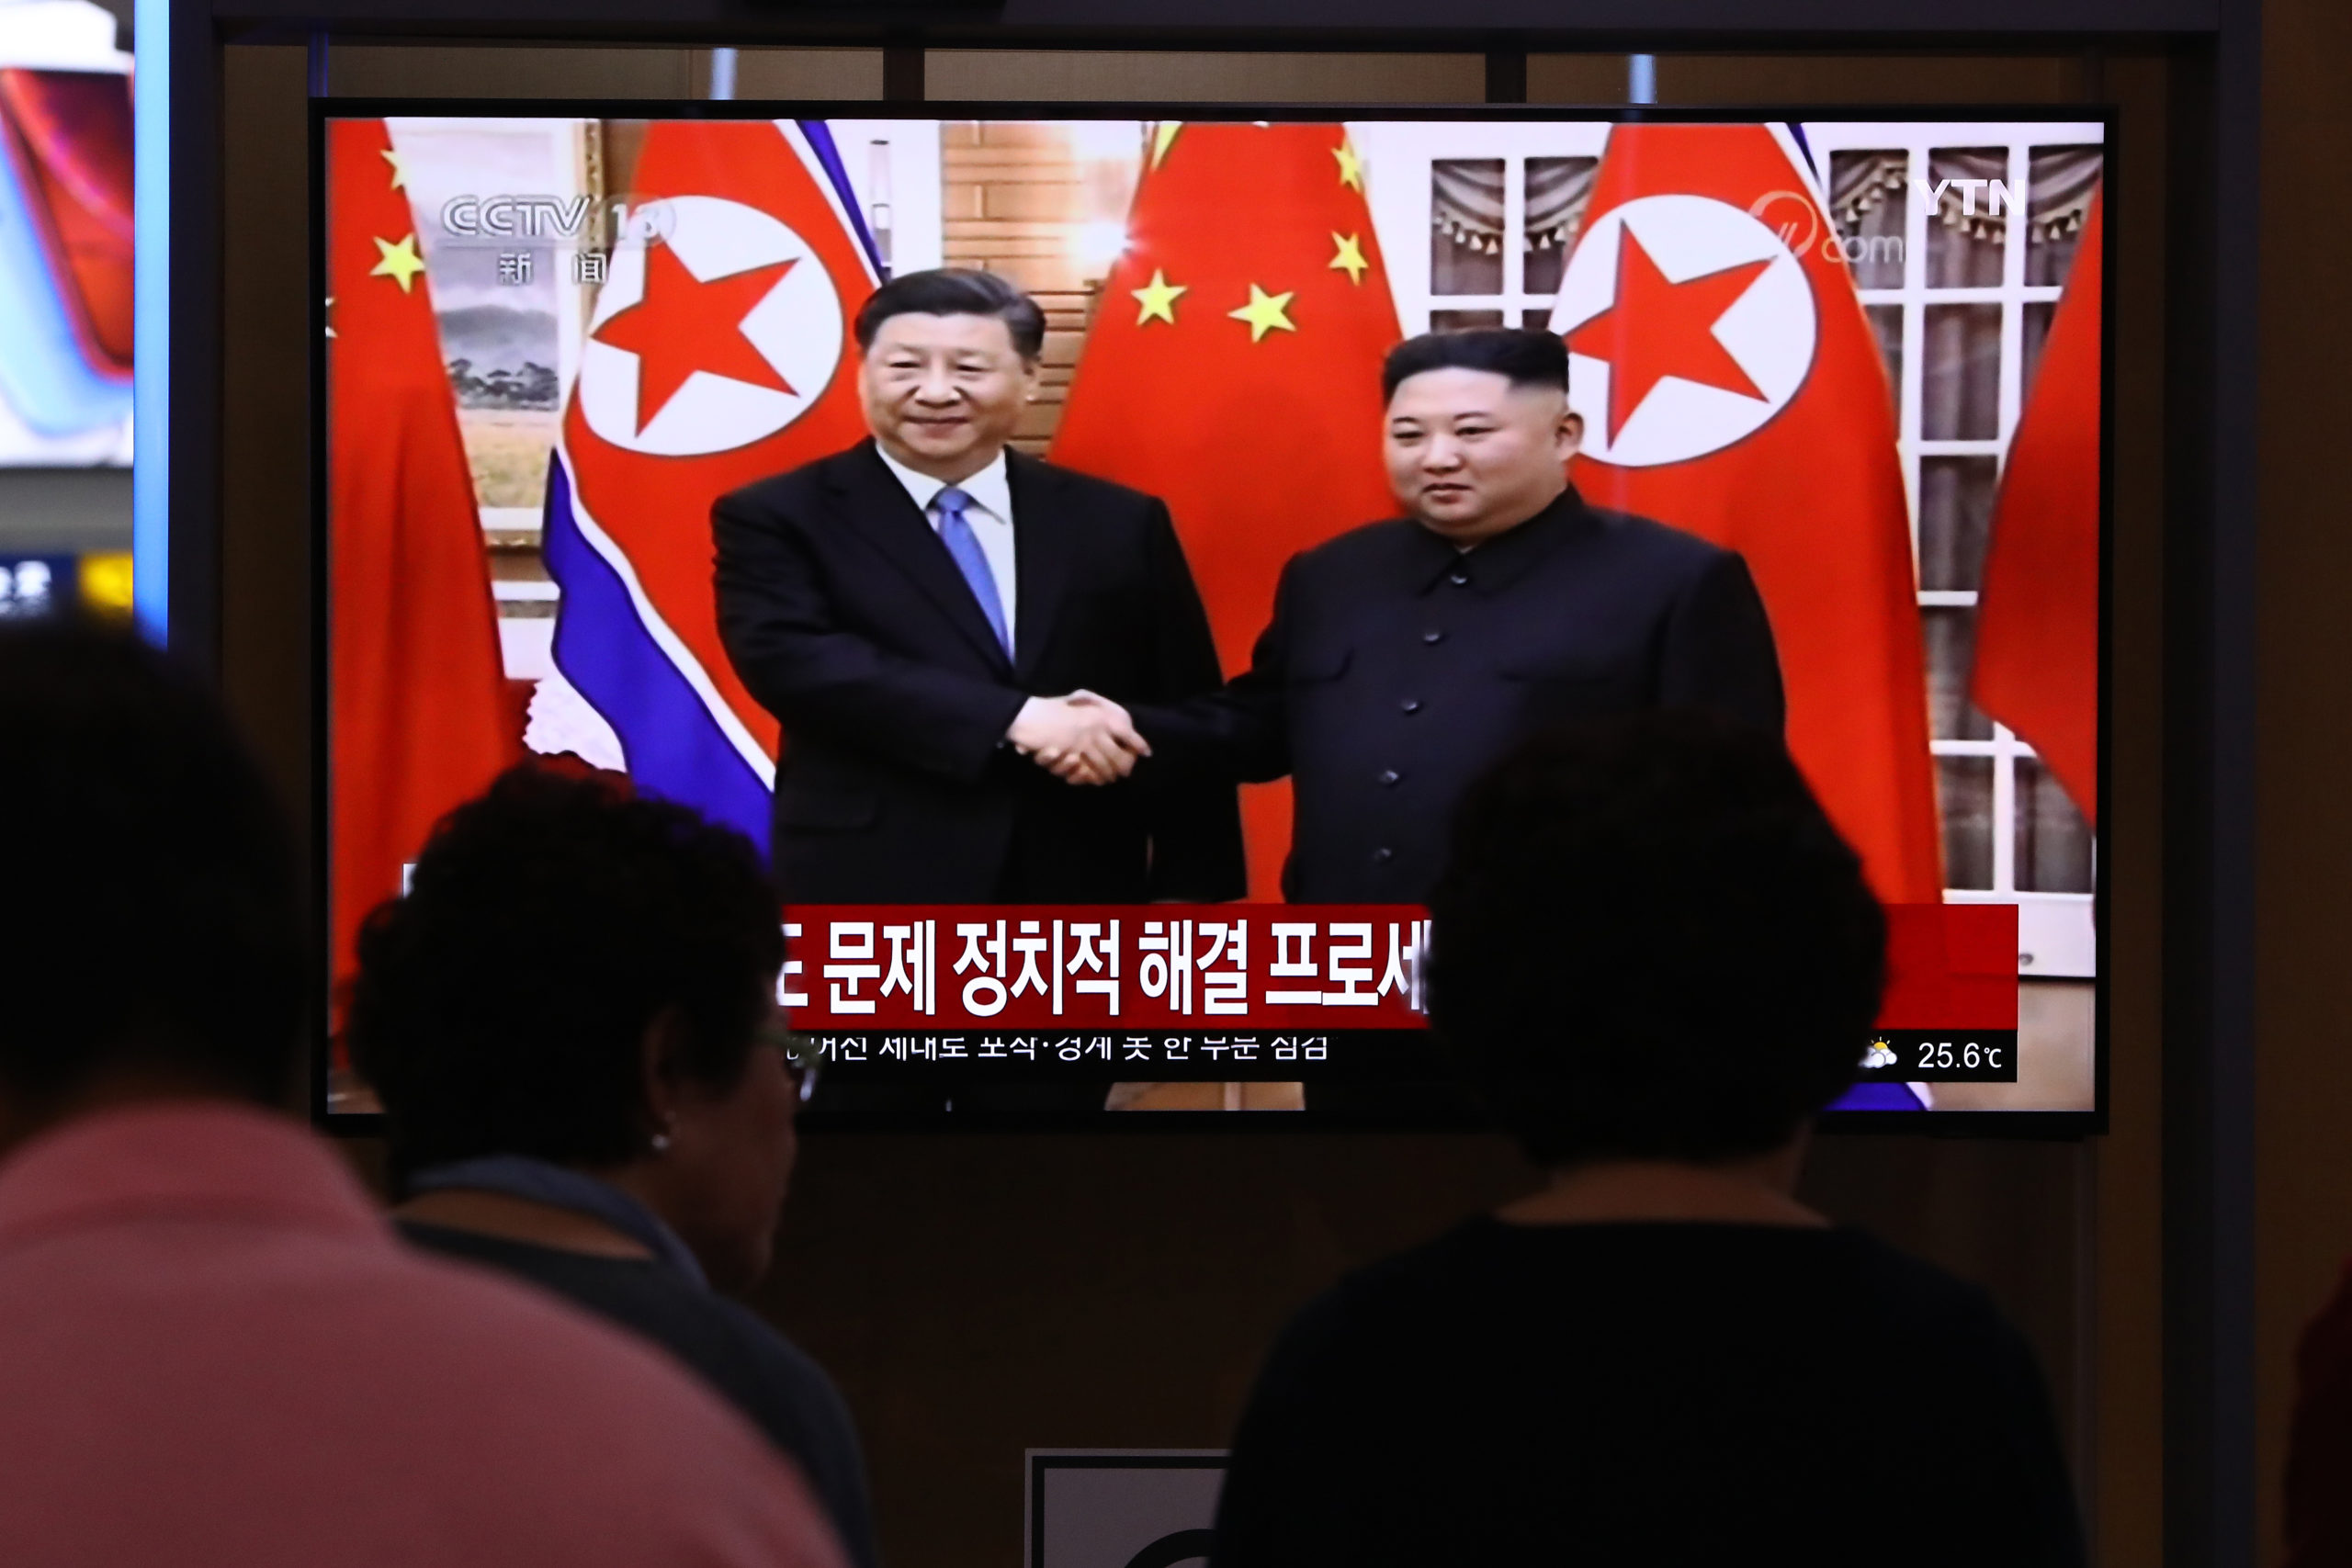 SEOUL, SOUTH KOREA - JUNE 20: South Koreans watch on a screen showing North Korean leader Kim Jong Un shaking hands with Chinese President Xi Jinping at the Seoul Railway Station on June 20, 2019 in Seoul, South Korea. Chinese President Xi Jinping visits to North Korea and he vowed to play a greater role in helping make progress in negotiations on Korean Peninsula issues. (Photo by Chung Sung-Jun/Getty Images)